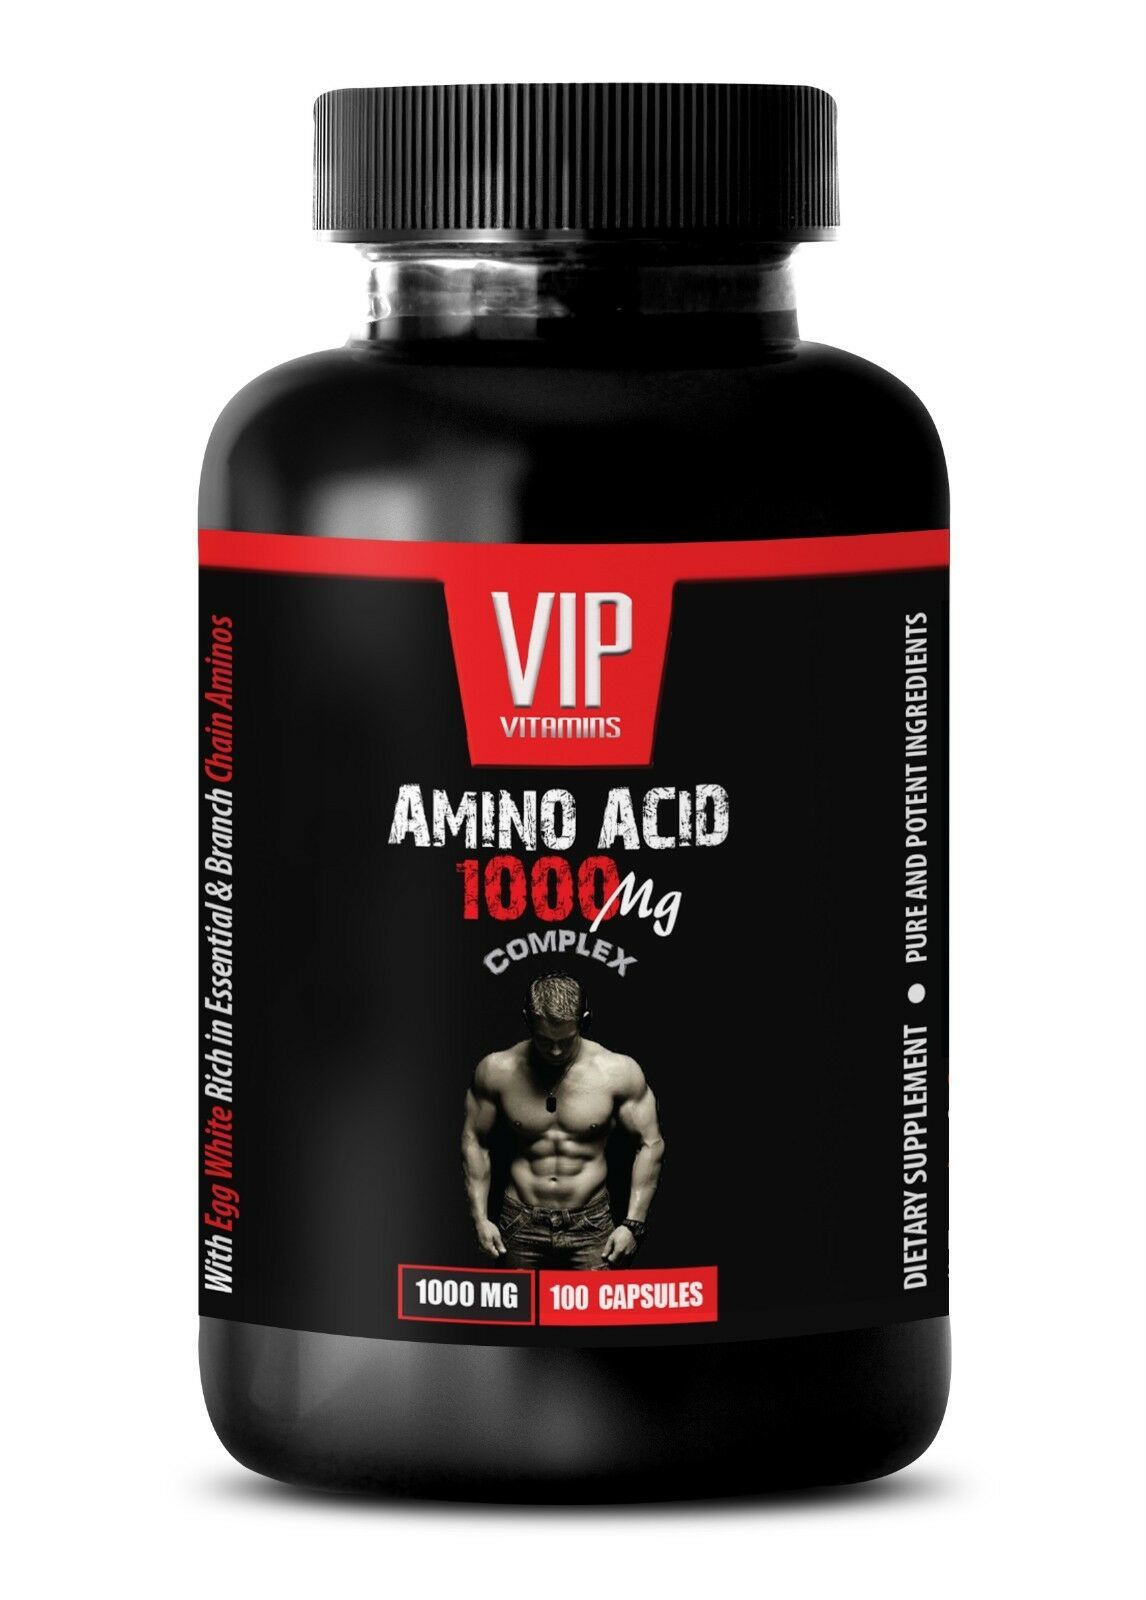 bcaa amino acids - AMINO ACID 1000mg - muscle recovery supplement 1 Bottle - $16.79